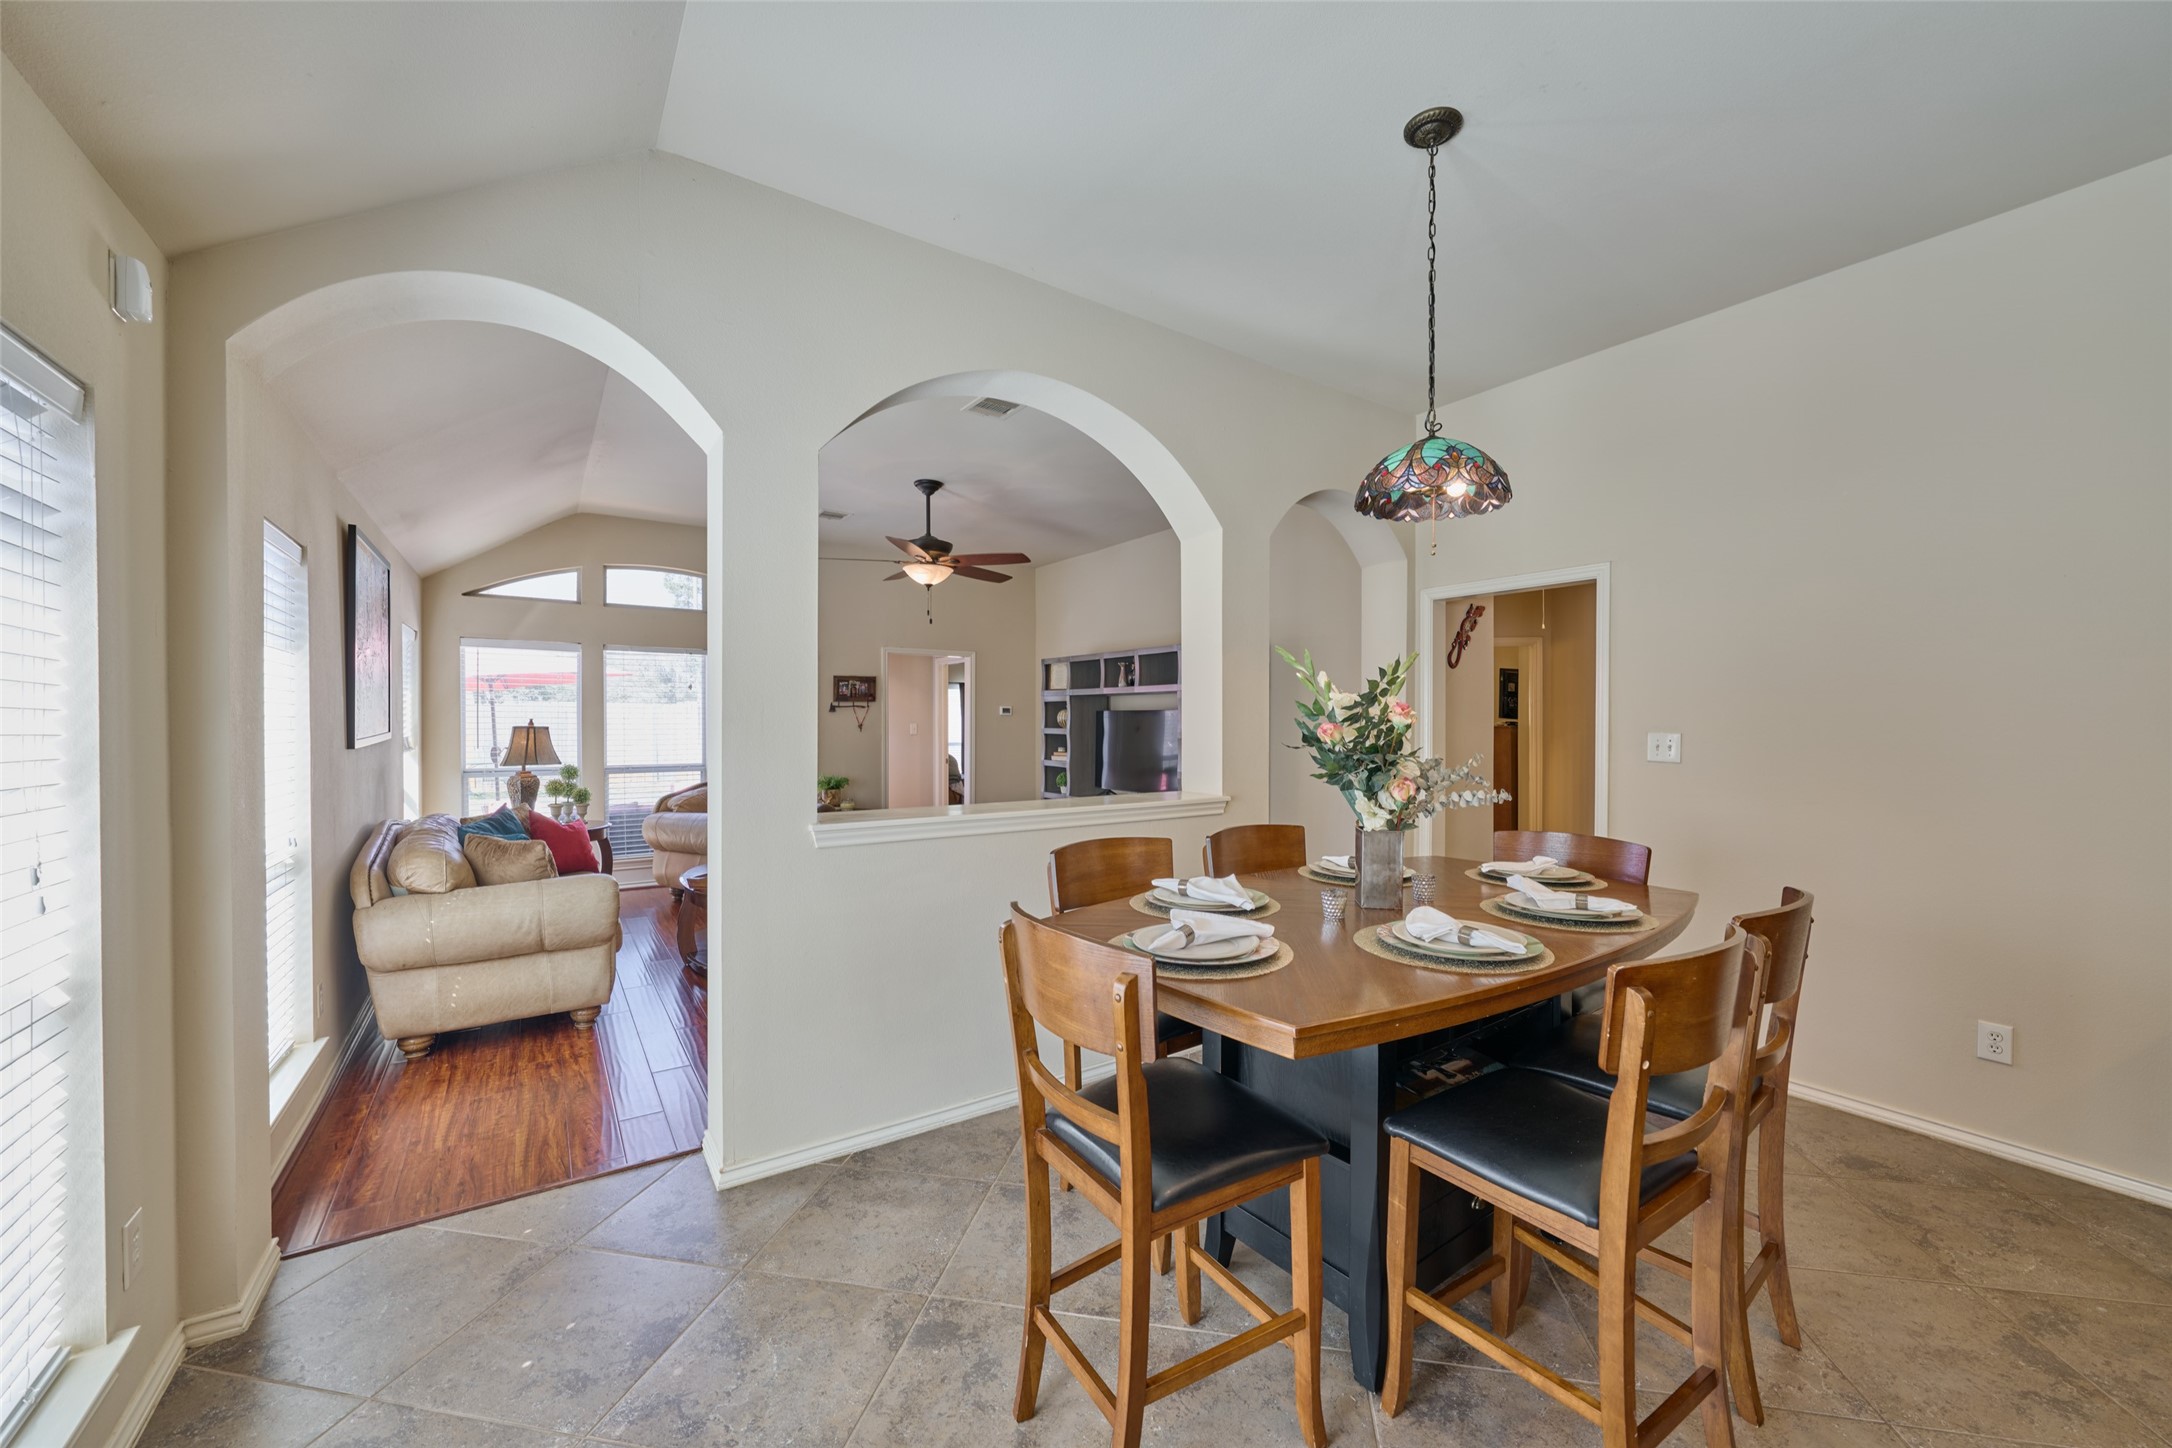 Tall arches divide the space but offer open views between the breakfast and family room.